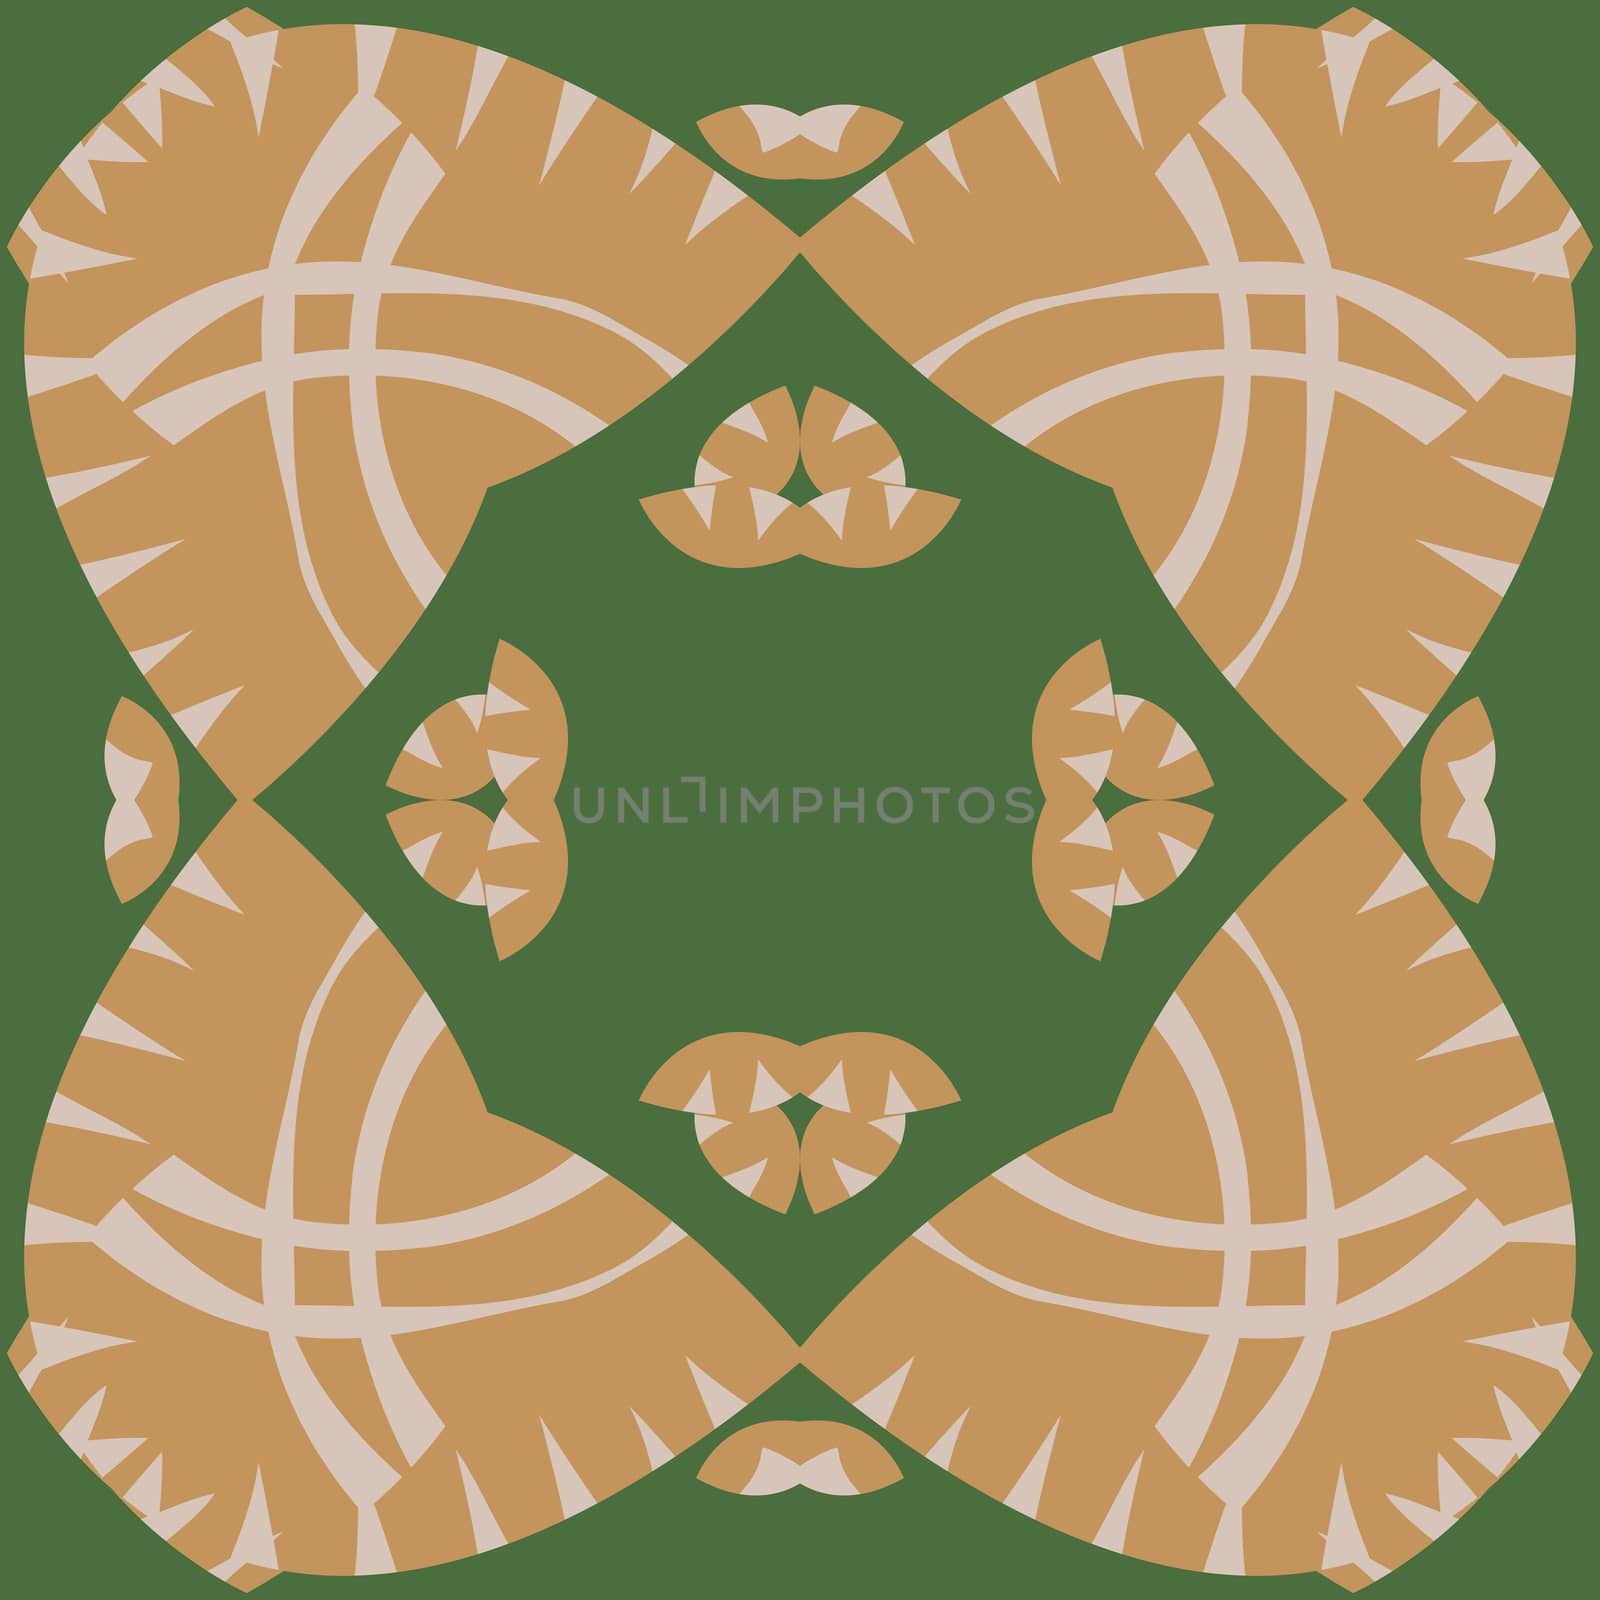 Symmetrical abstract pattern of curved lines and triangles